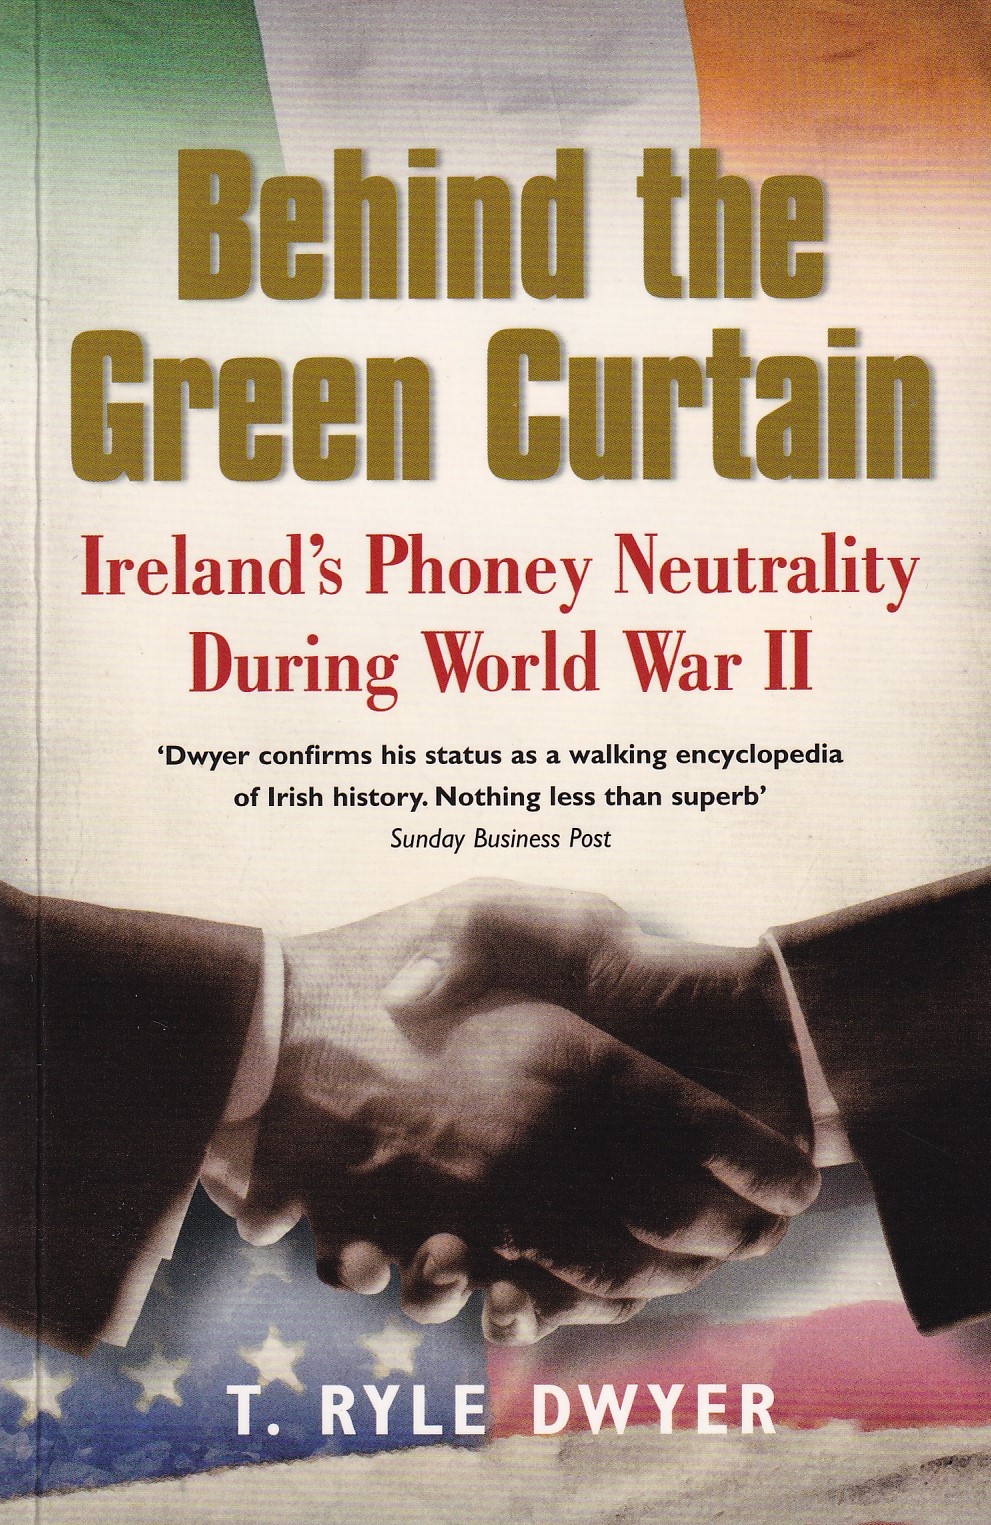 Behind the Green Curtain: Ireland’s Phoney Neutrality during World War II | T. Ryle Dwyer | Charlie Byrne's